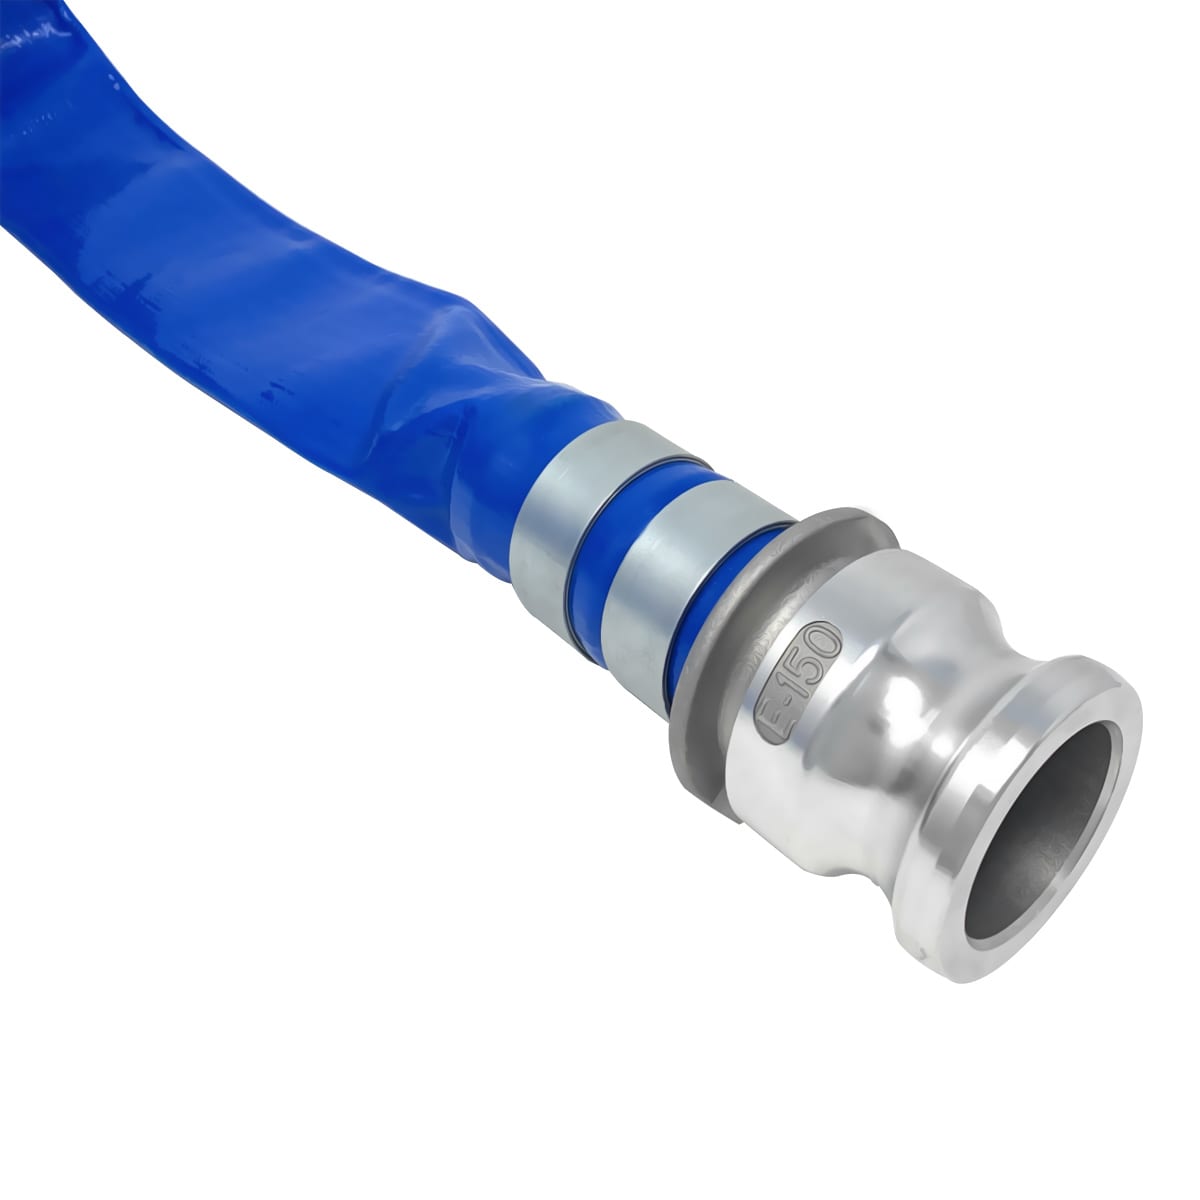 1-1/2 x 50' Blue PVC Lay Flat Discharge Hose, Camlock Fittings